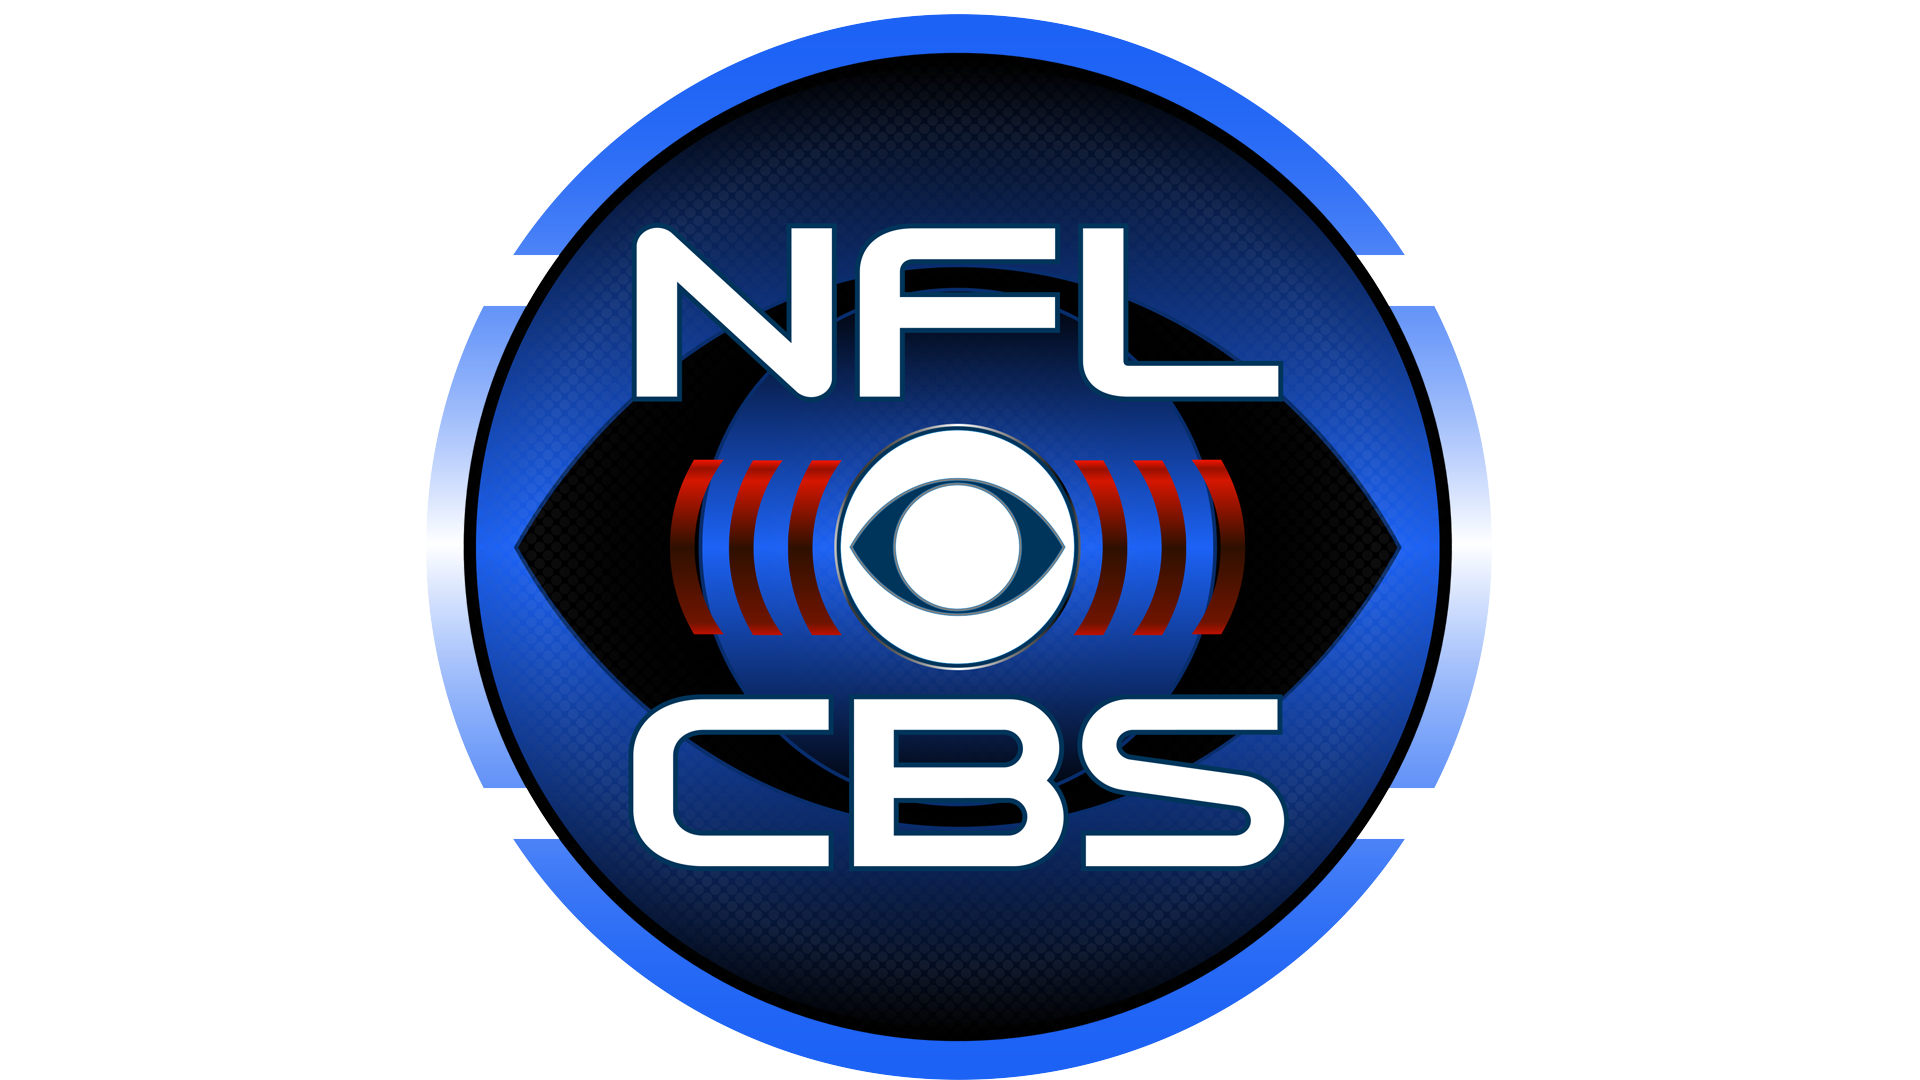 NFL Kickoff 2017: CBS Sports' Coverage To See Changes in Front of